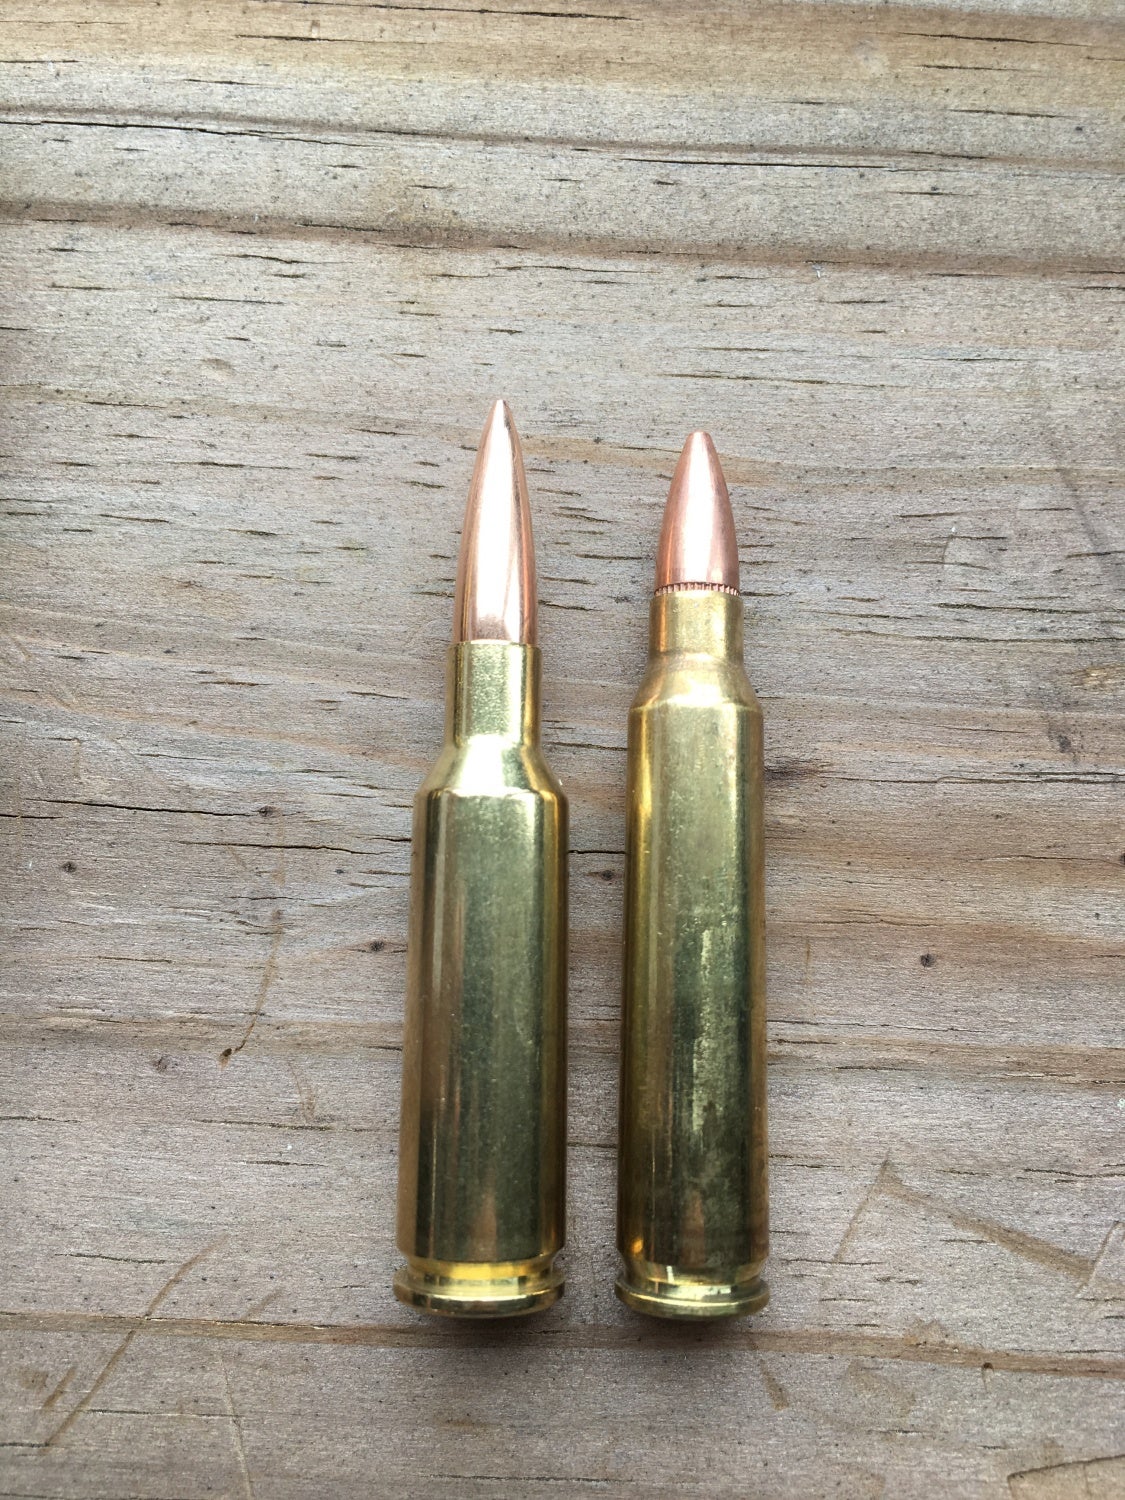 Interestingly, the .224 Valkyrie is similar looking to the 6.5 Grendel whic...